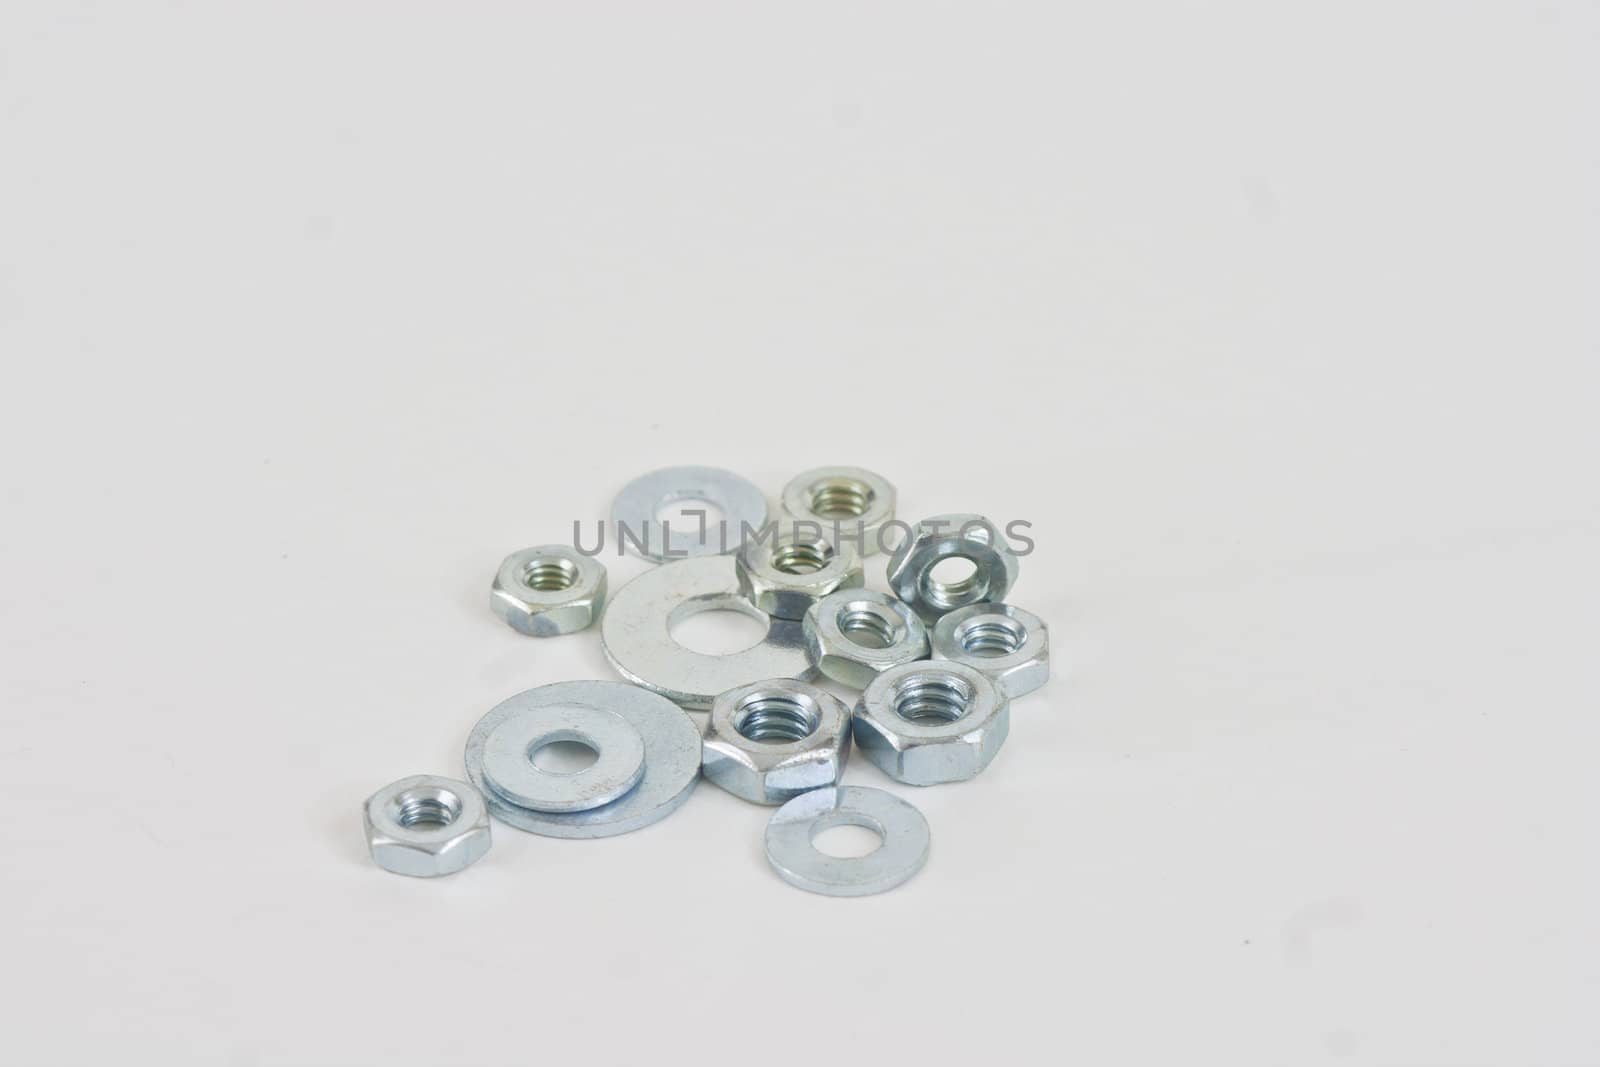 A pile of assorted nuts and washers on a white background.